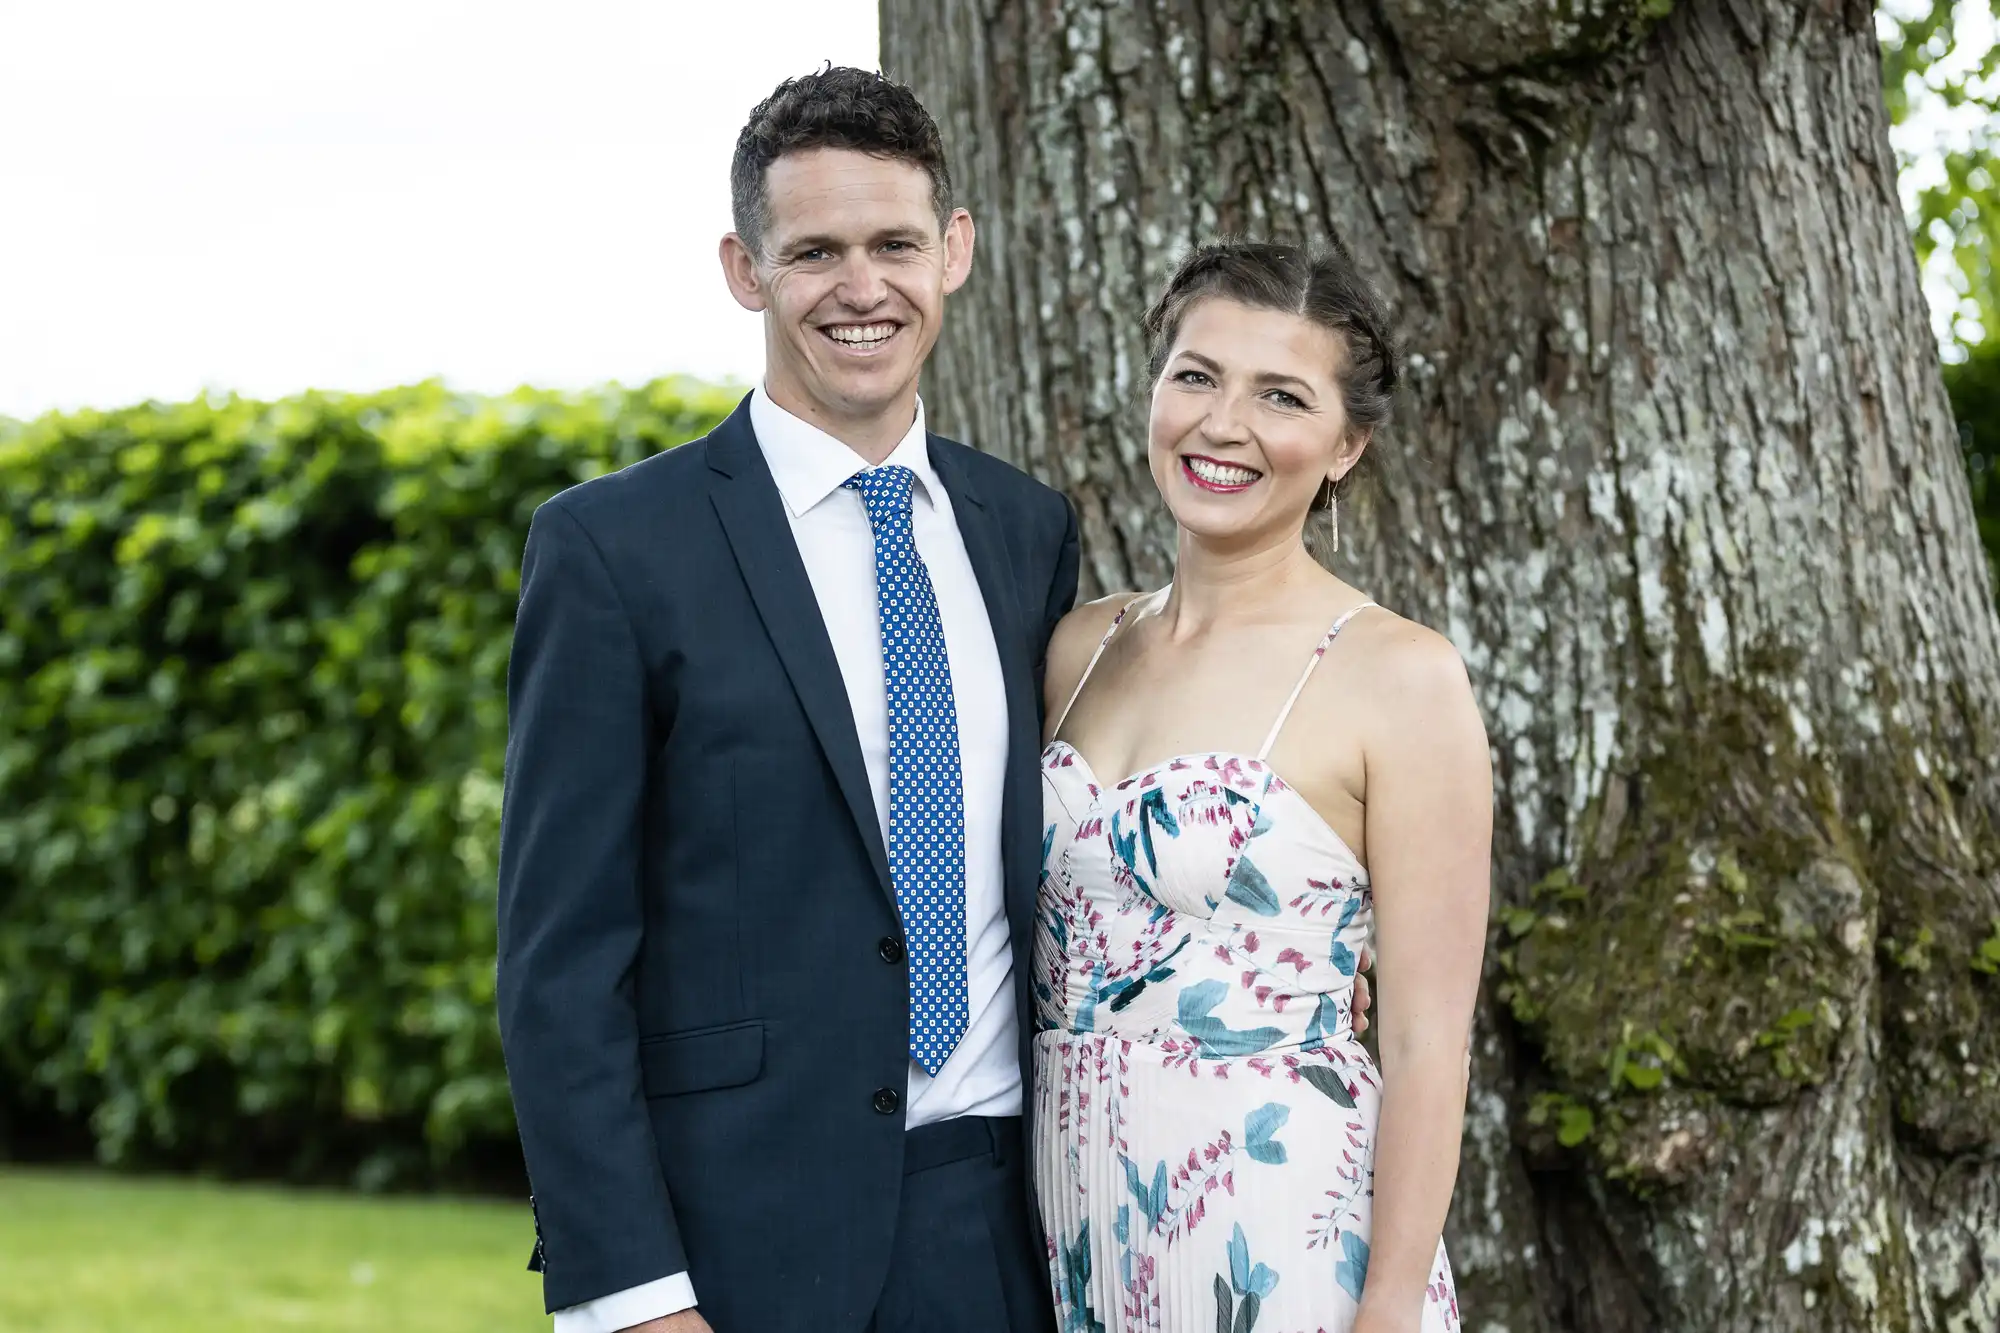 A smiling couple in formal attire, the man in a dark suit and the woman in a floral dress, standing by a large tree.